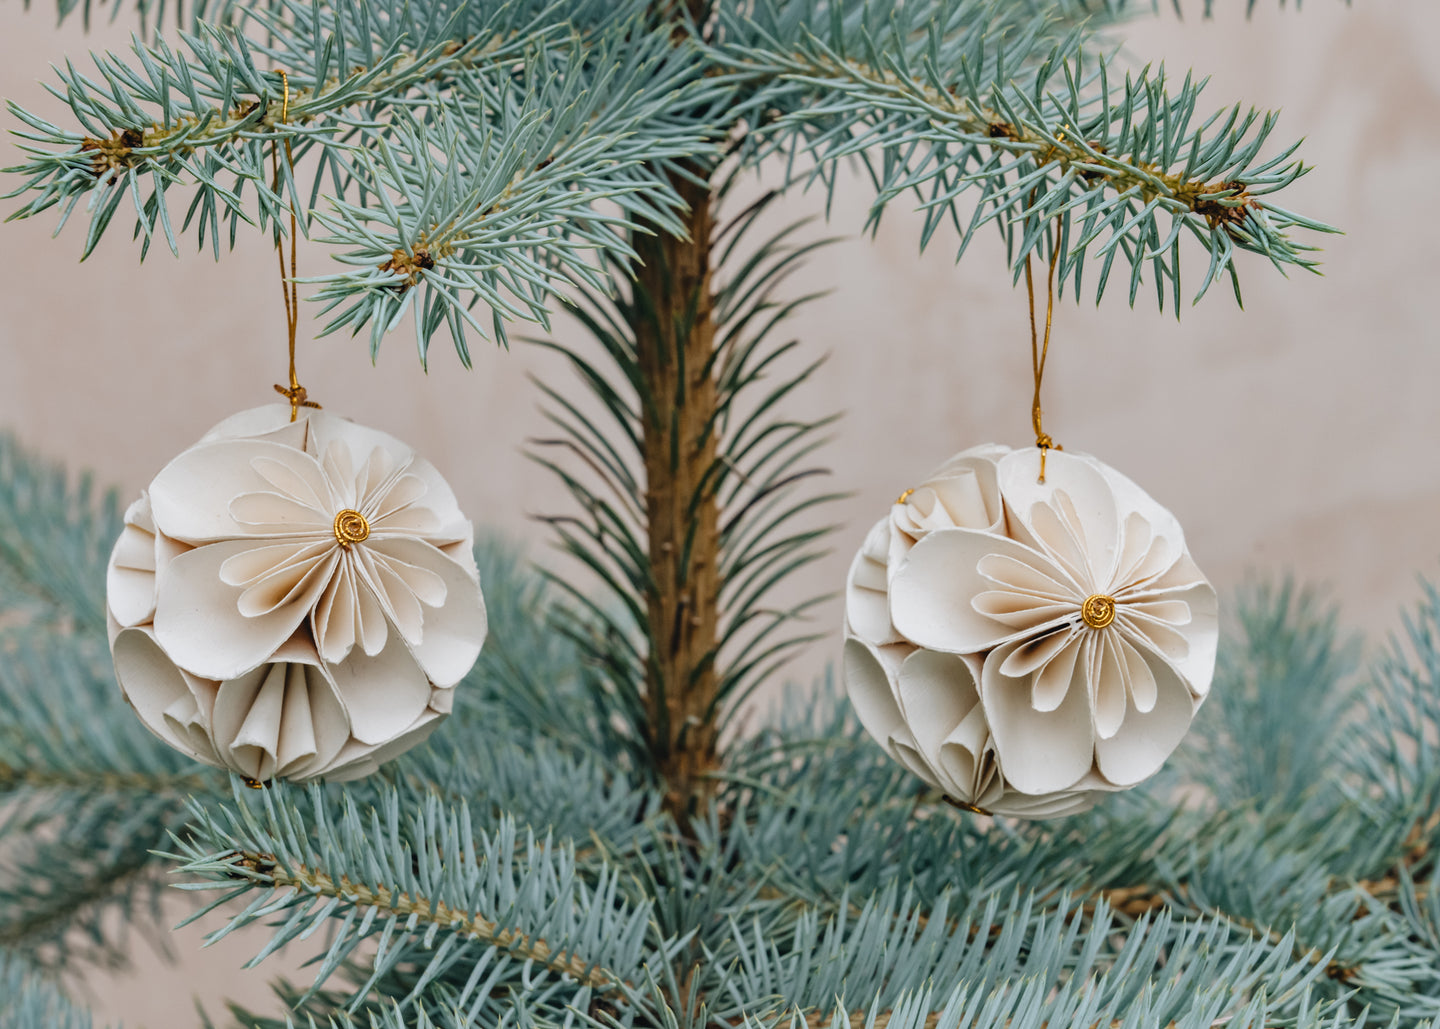 AfroArt Flower Ball Ornaments in White, pack of two